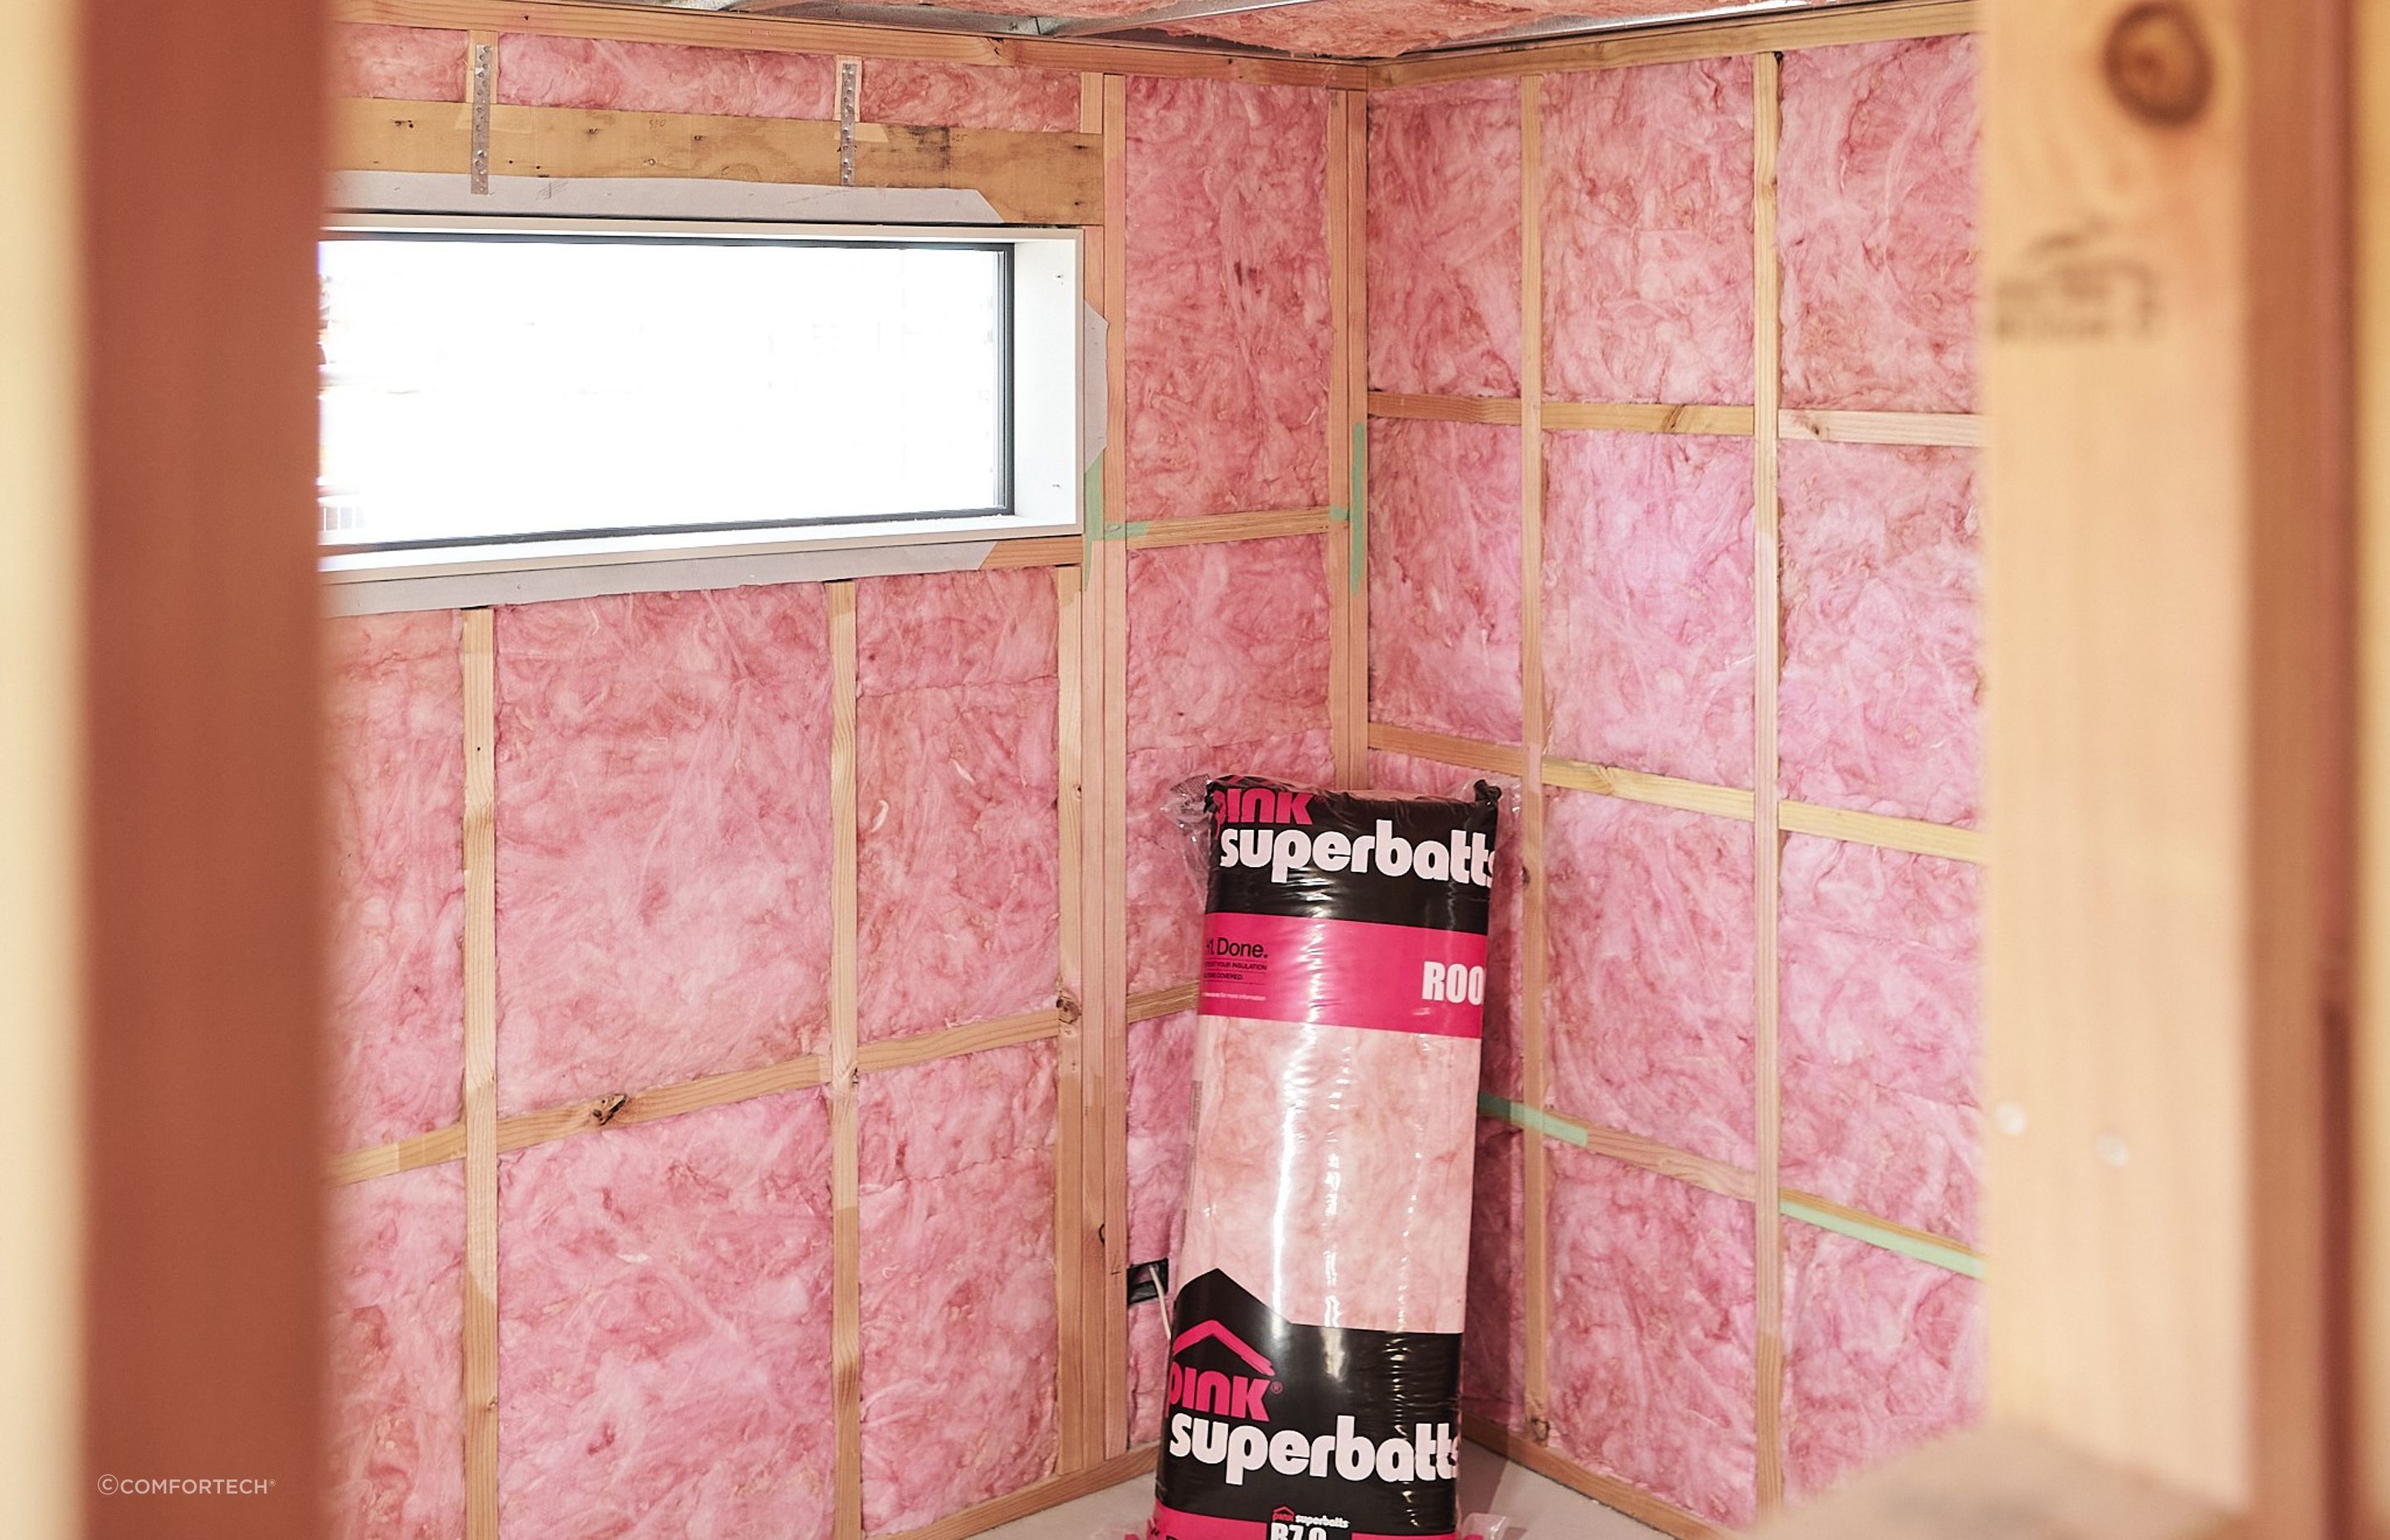 A trusted option like PINK® SUPERBATTS® Insulation is a great way ensure your bathroom walls retain heat in your space.